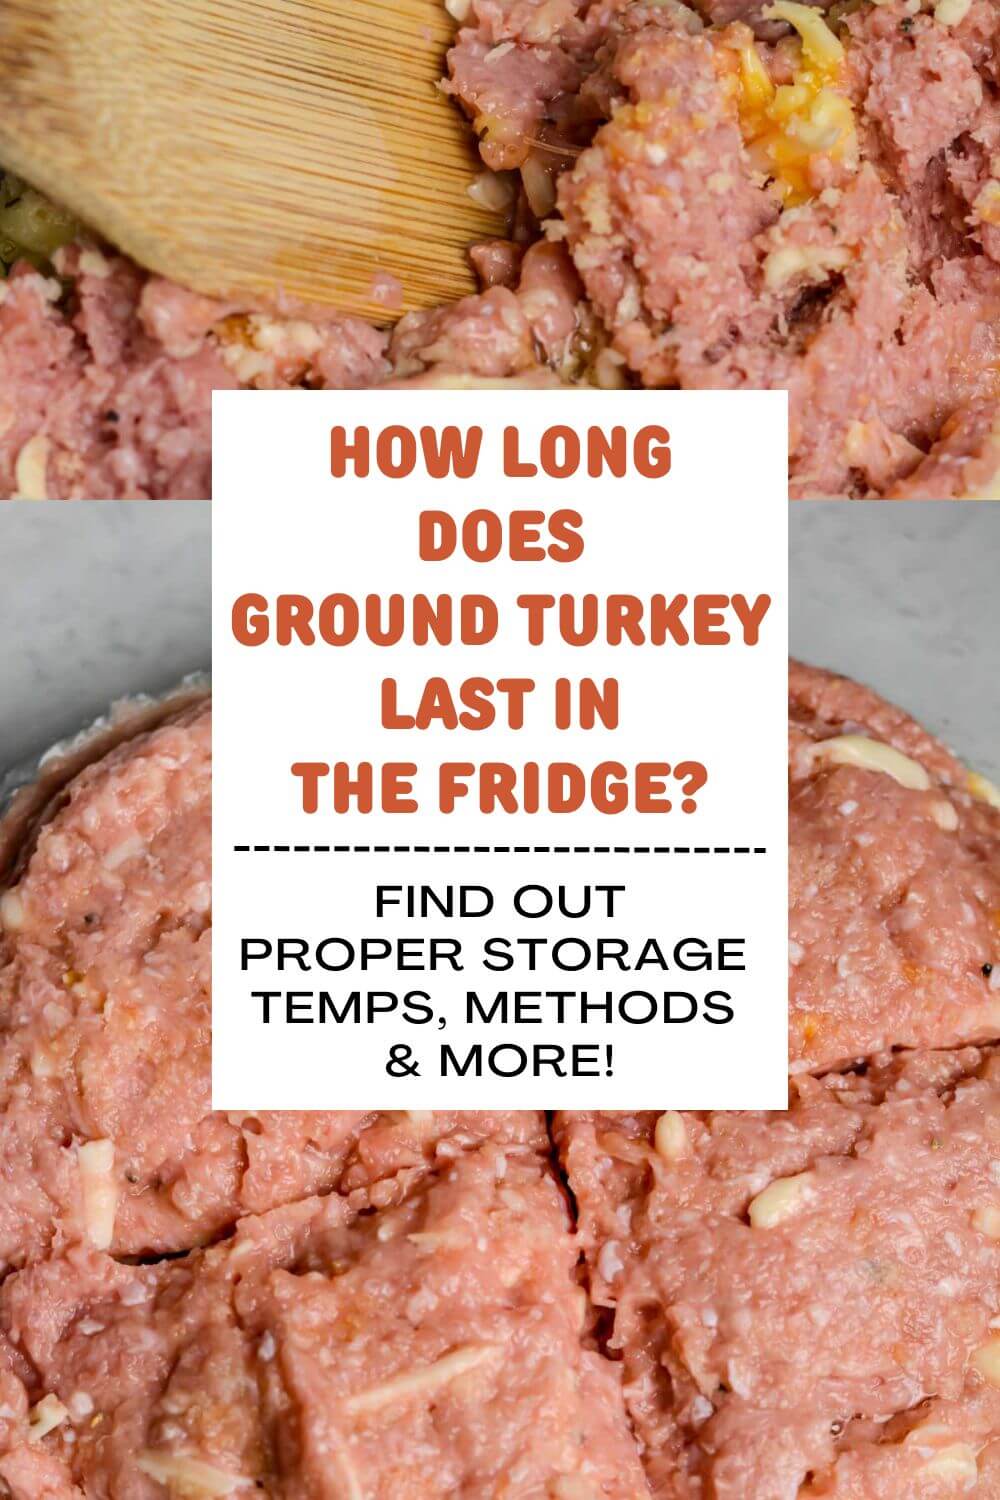 How Long Does Ground Turkey Last in the Fridge?